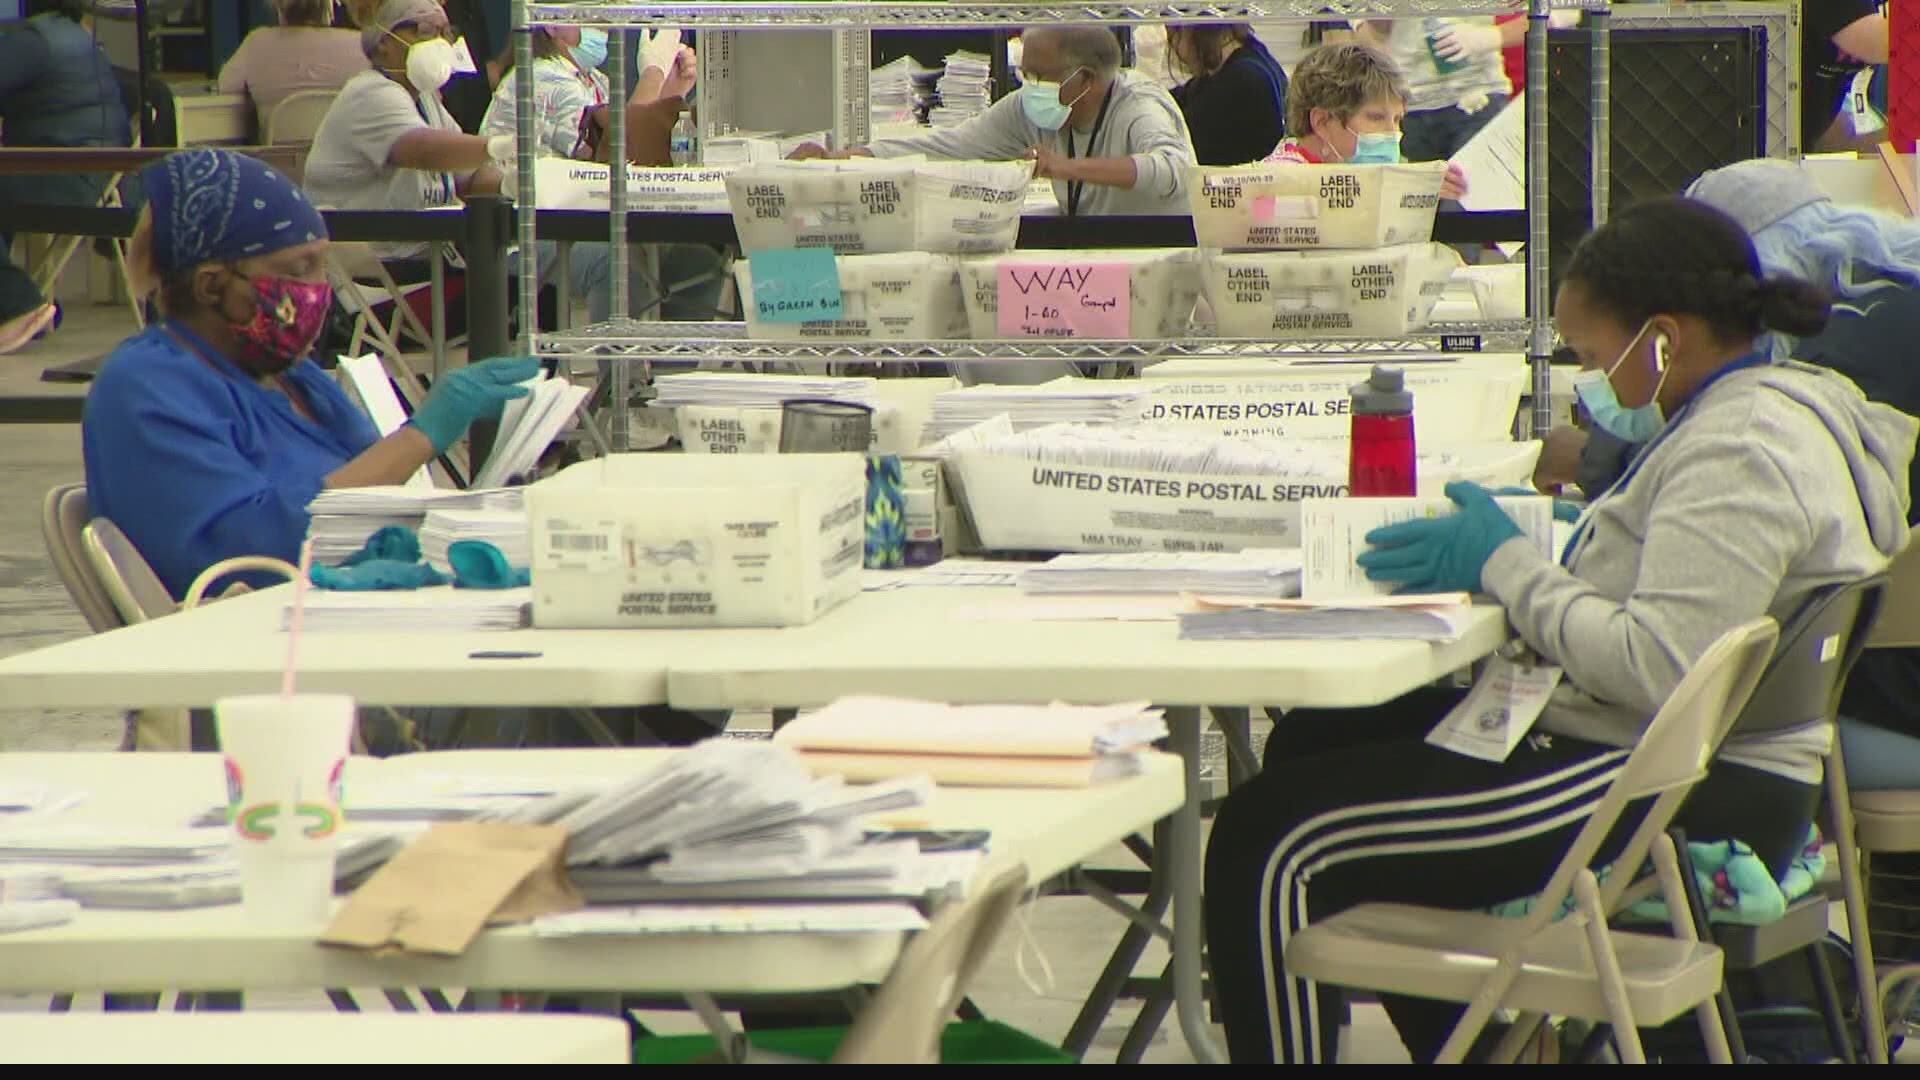 Amid questions of misdirected mail, the postal service is defending its handling of ballots.